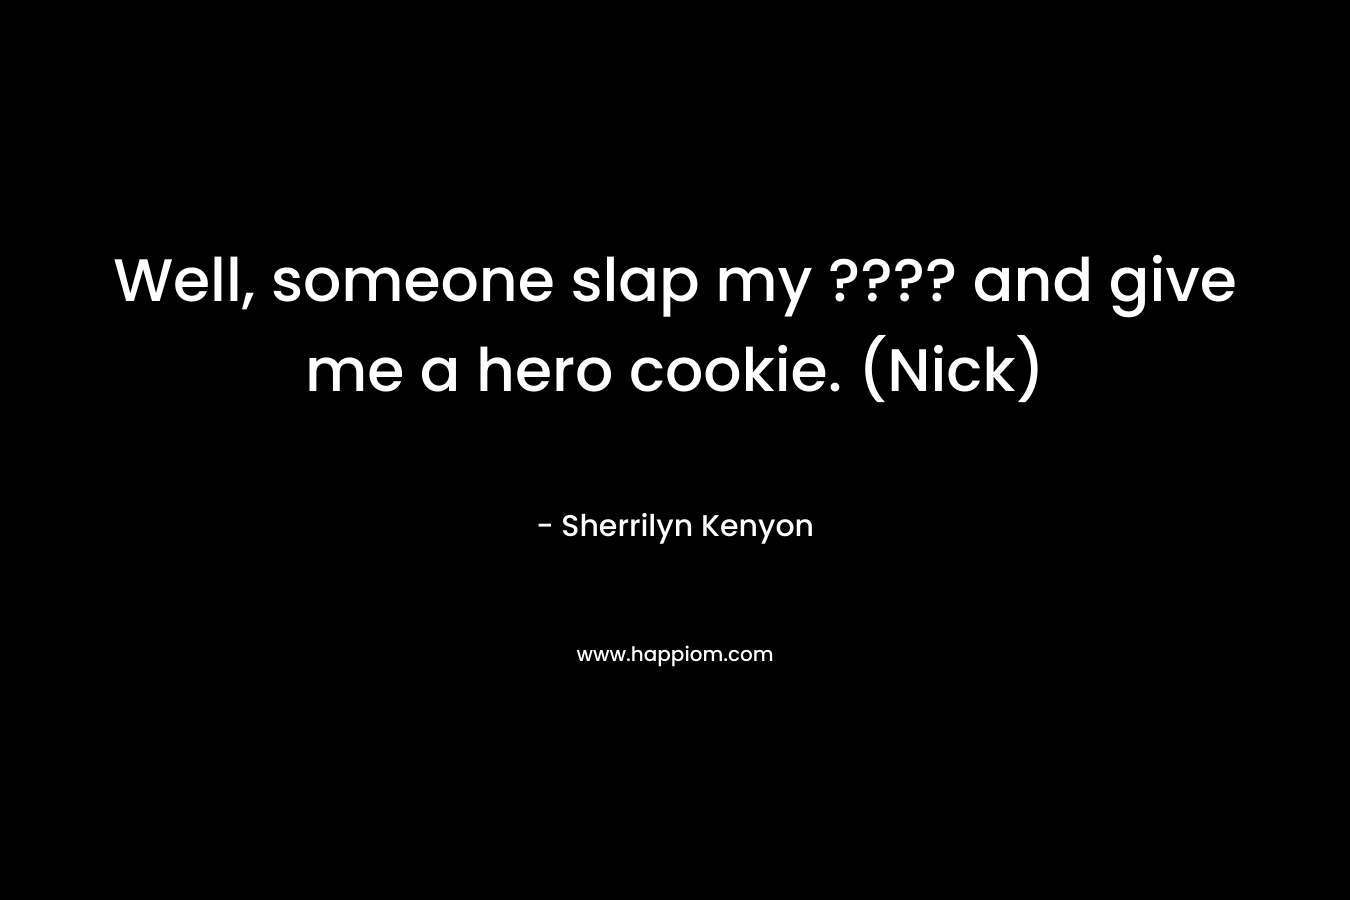 Well, someone slap my ???? and give me a hero cookie. (Nick)